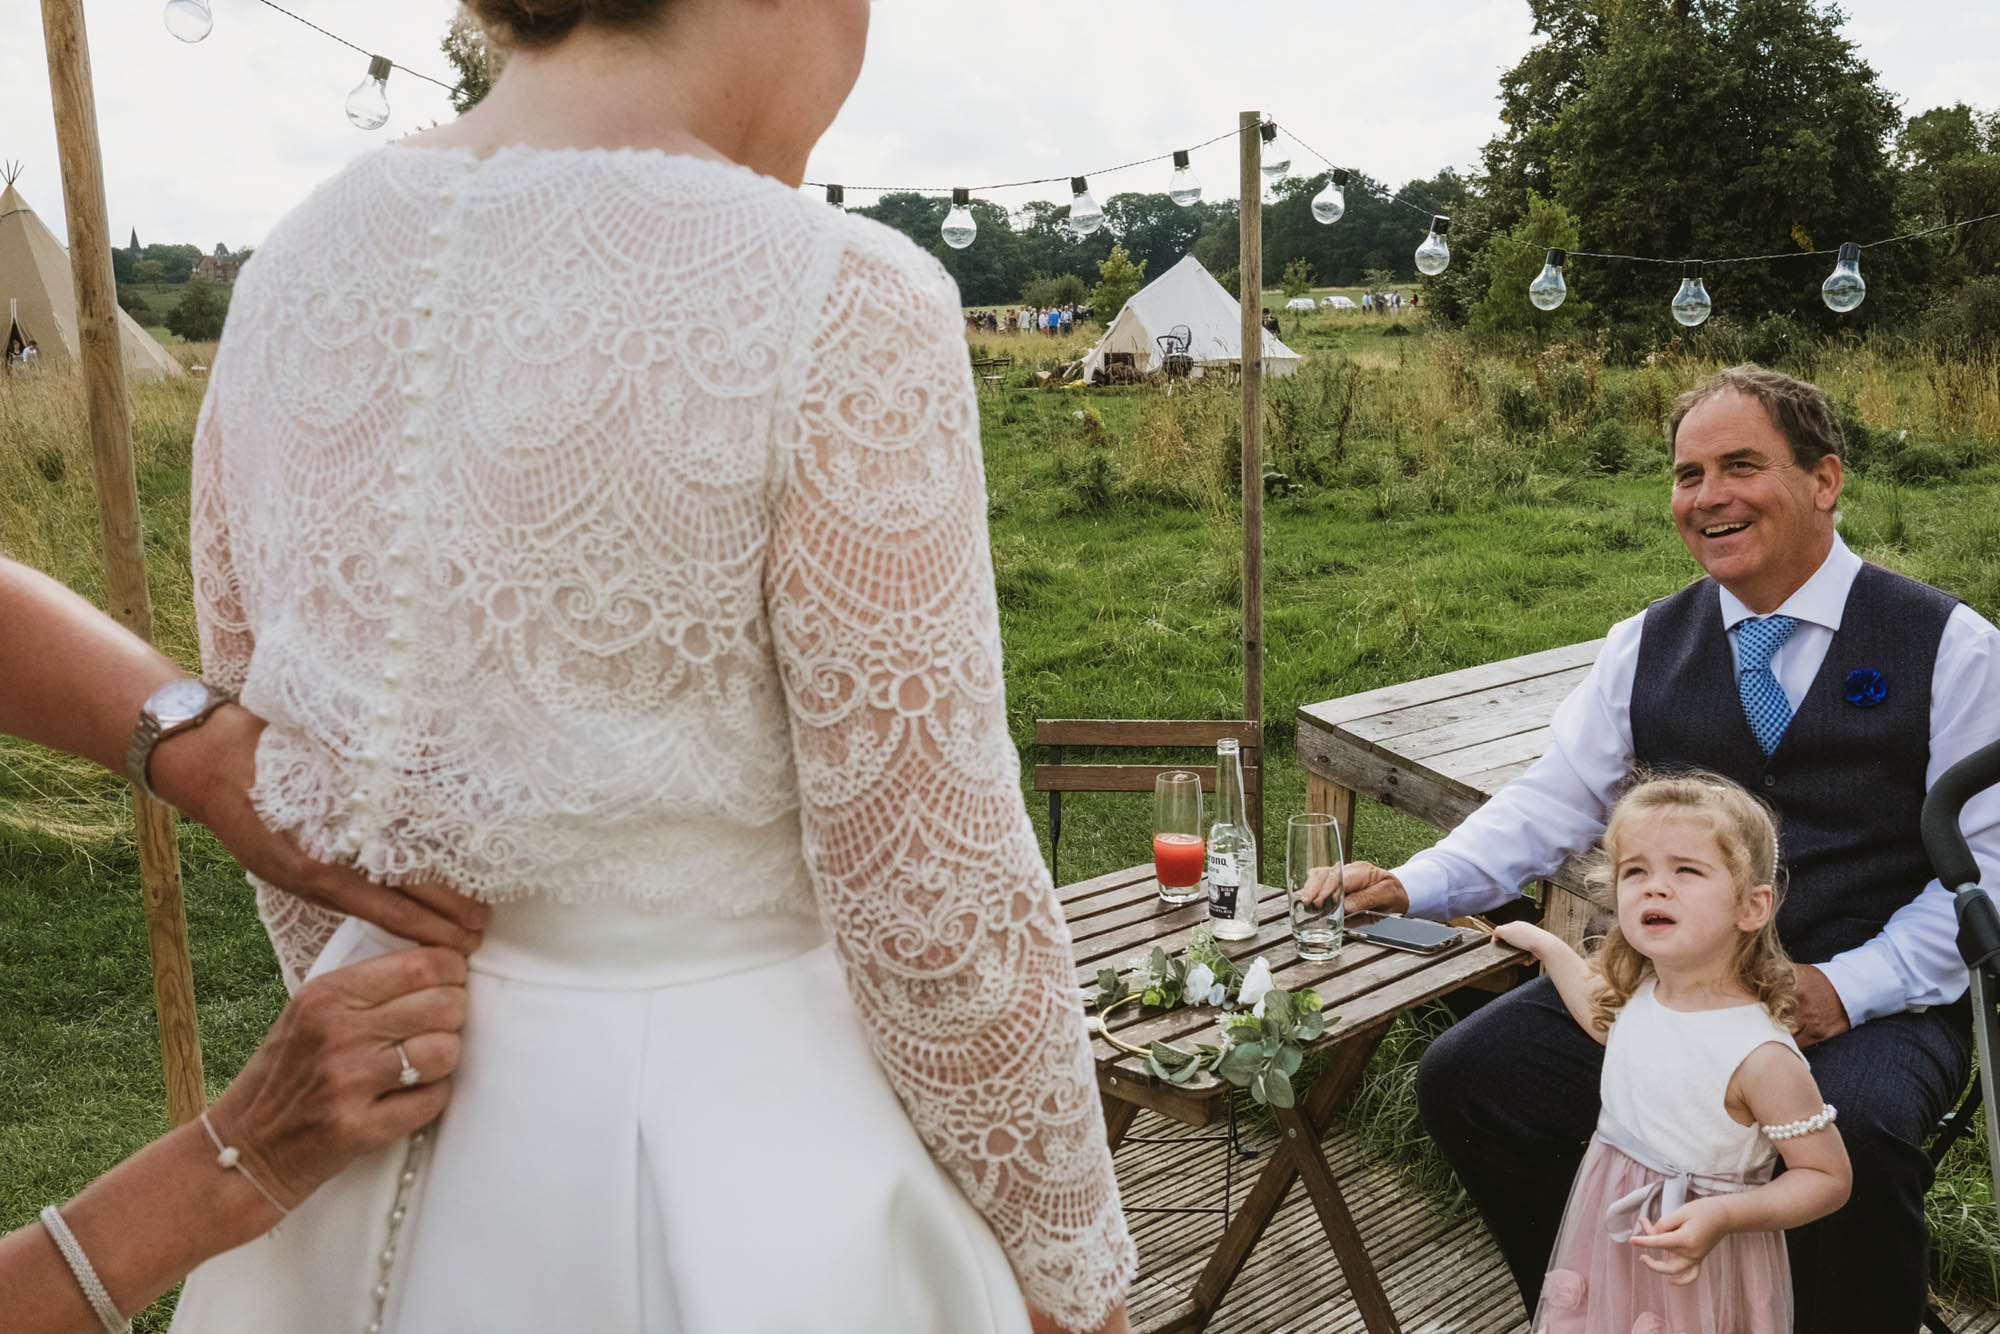 A favourite image from Sian & Sam's wedding which was at Home Farm Glamping, taken by top UK documentary wedding photographers York Place Studios